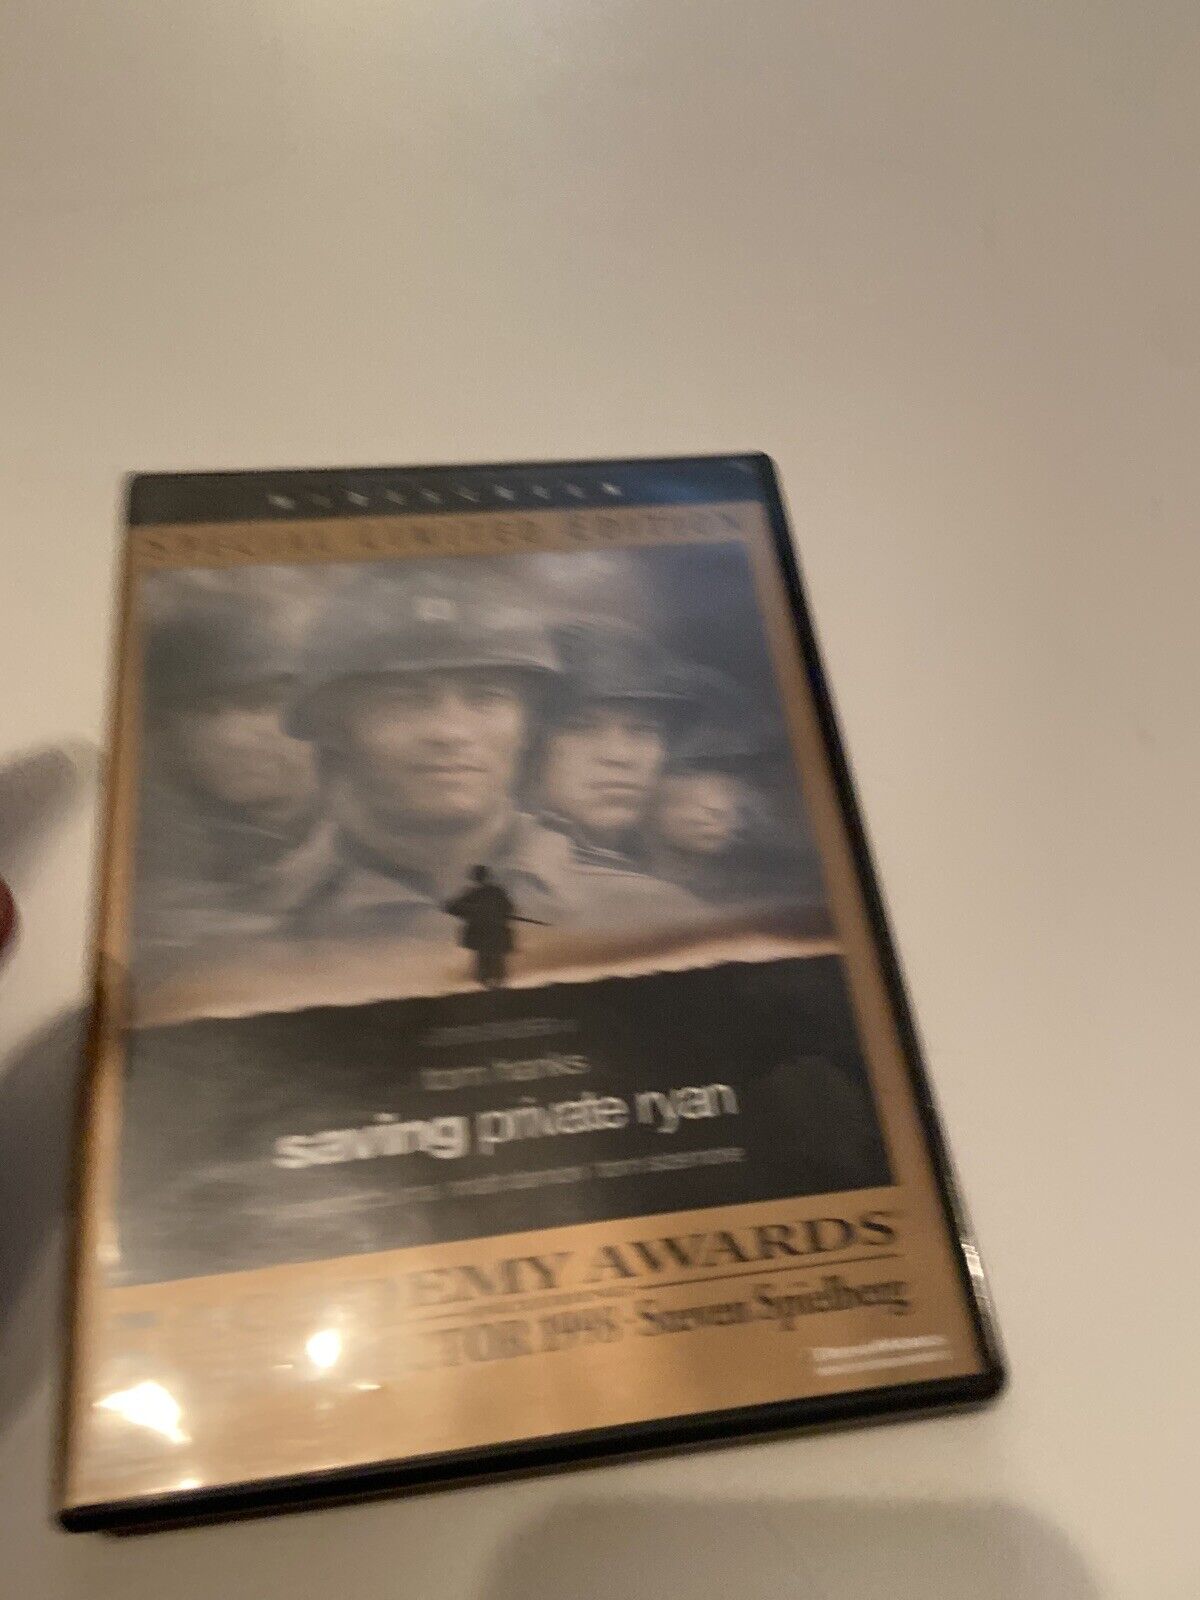 Saving Private Ryan [New DVD] Ltd Ed, Special Ed, Widescreen, Dolby